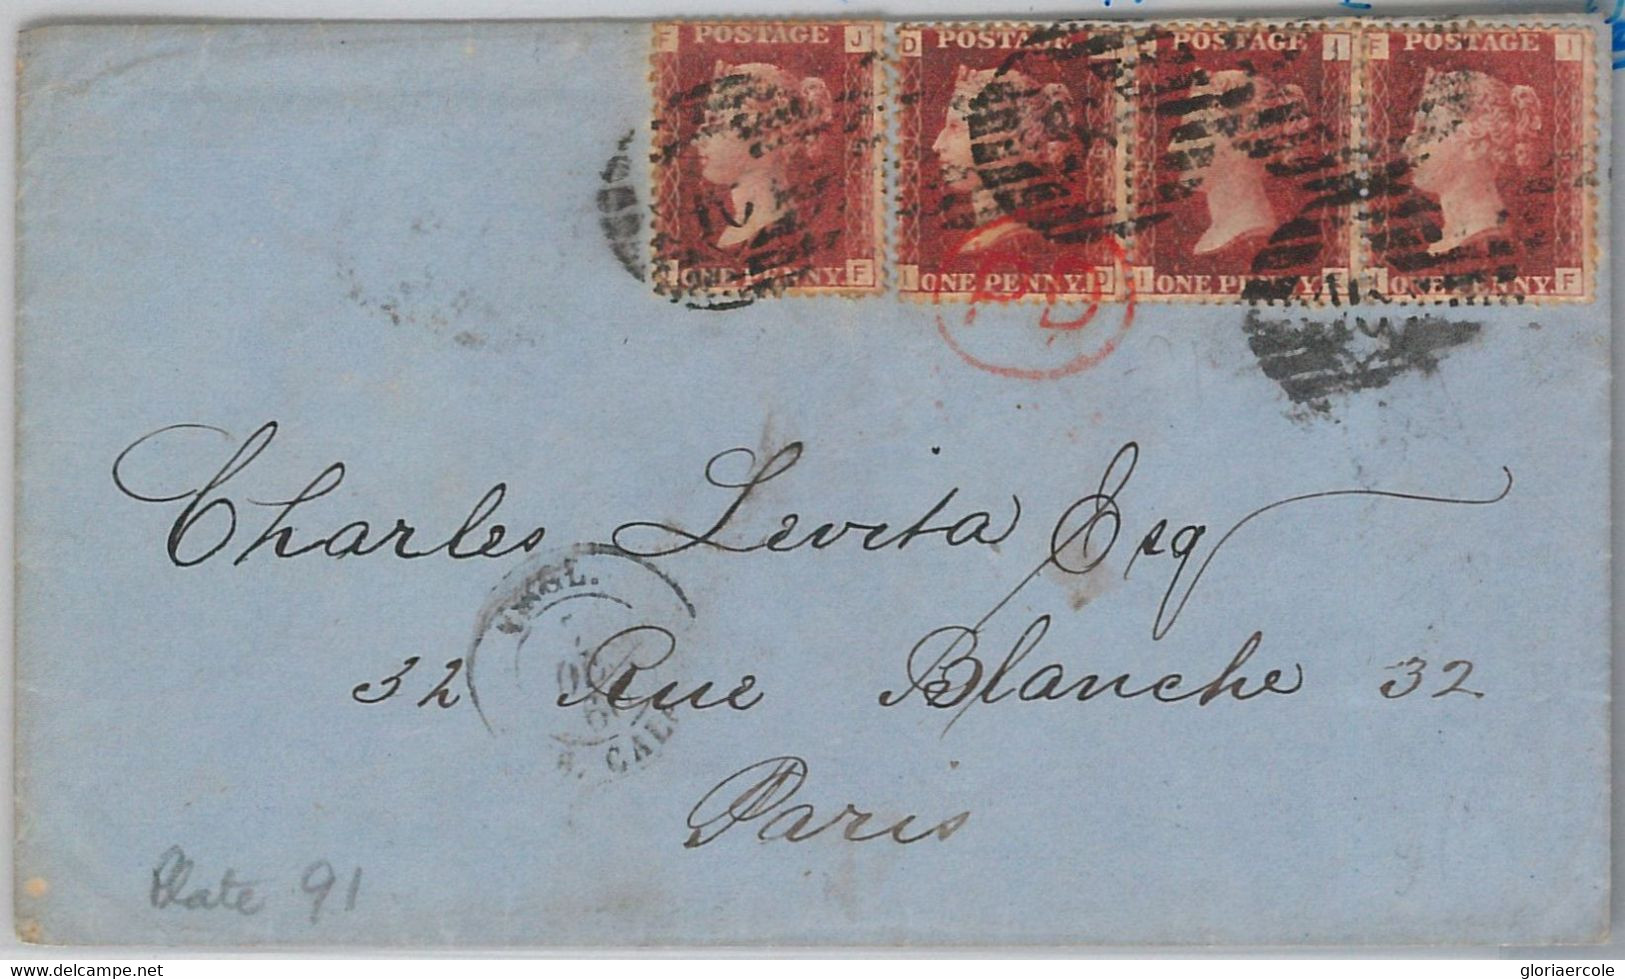 50705 - GB -  POSTAL HISTORY -  COVER To PARIS  Red Penny  1866 -- NICE! - Lettres & Documents